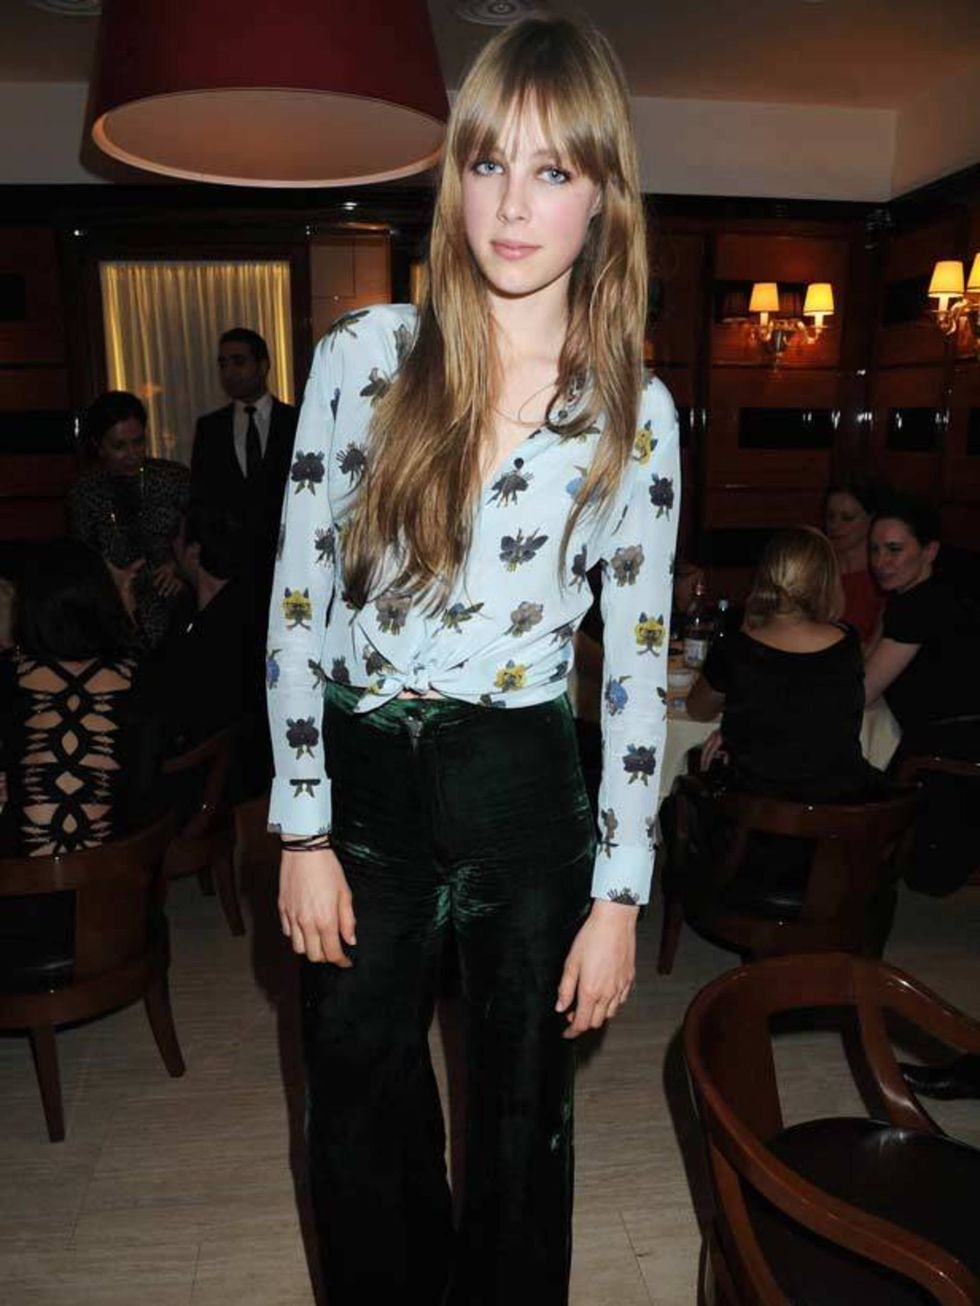 <p><a href="http://www.elleuk.com/starstyle/celebrity-trends/(section)/ones-to-watch-2011/(offset)//(img)/701667">Edie Campbell</a> channeling this season's 70s trend at the Istanbul Edition Hotel Launch Party, Turkey, 4 May 2011</p>